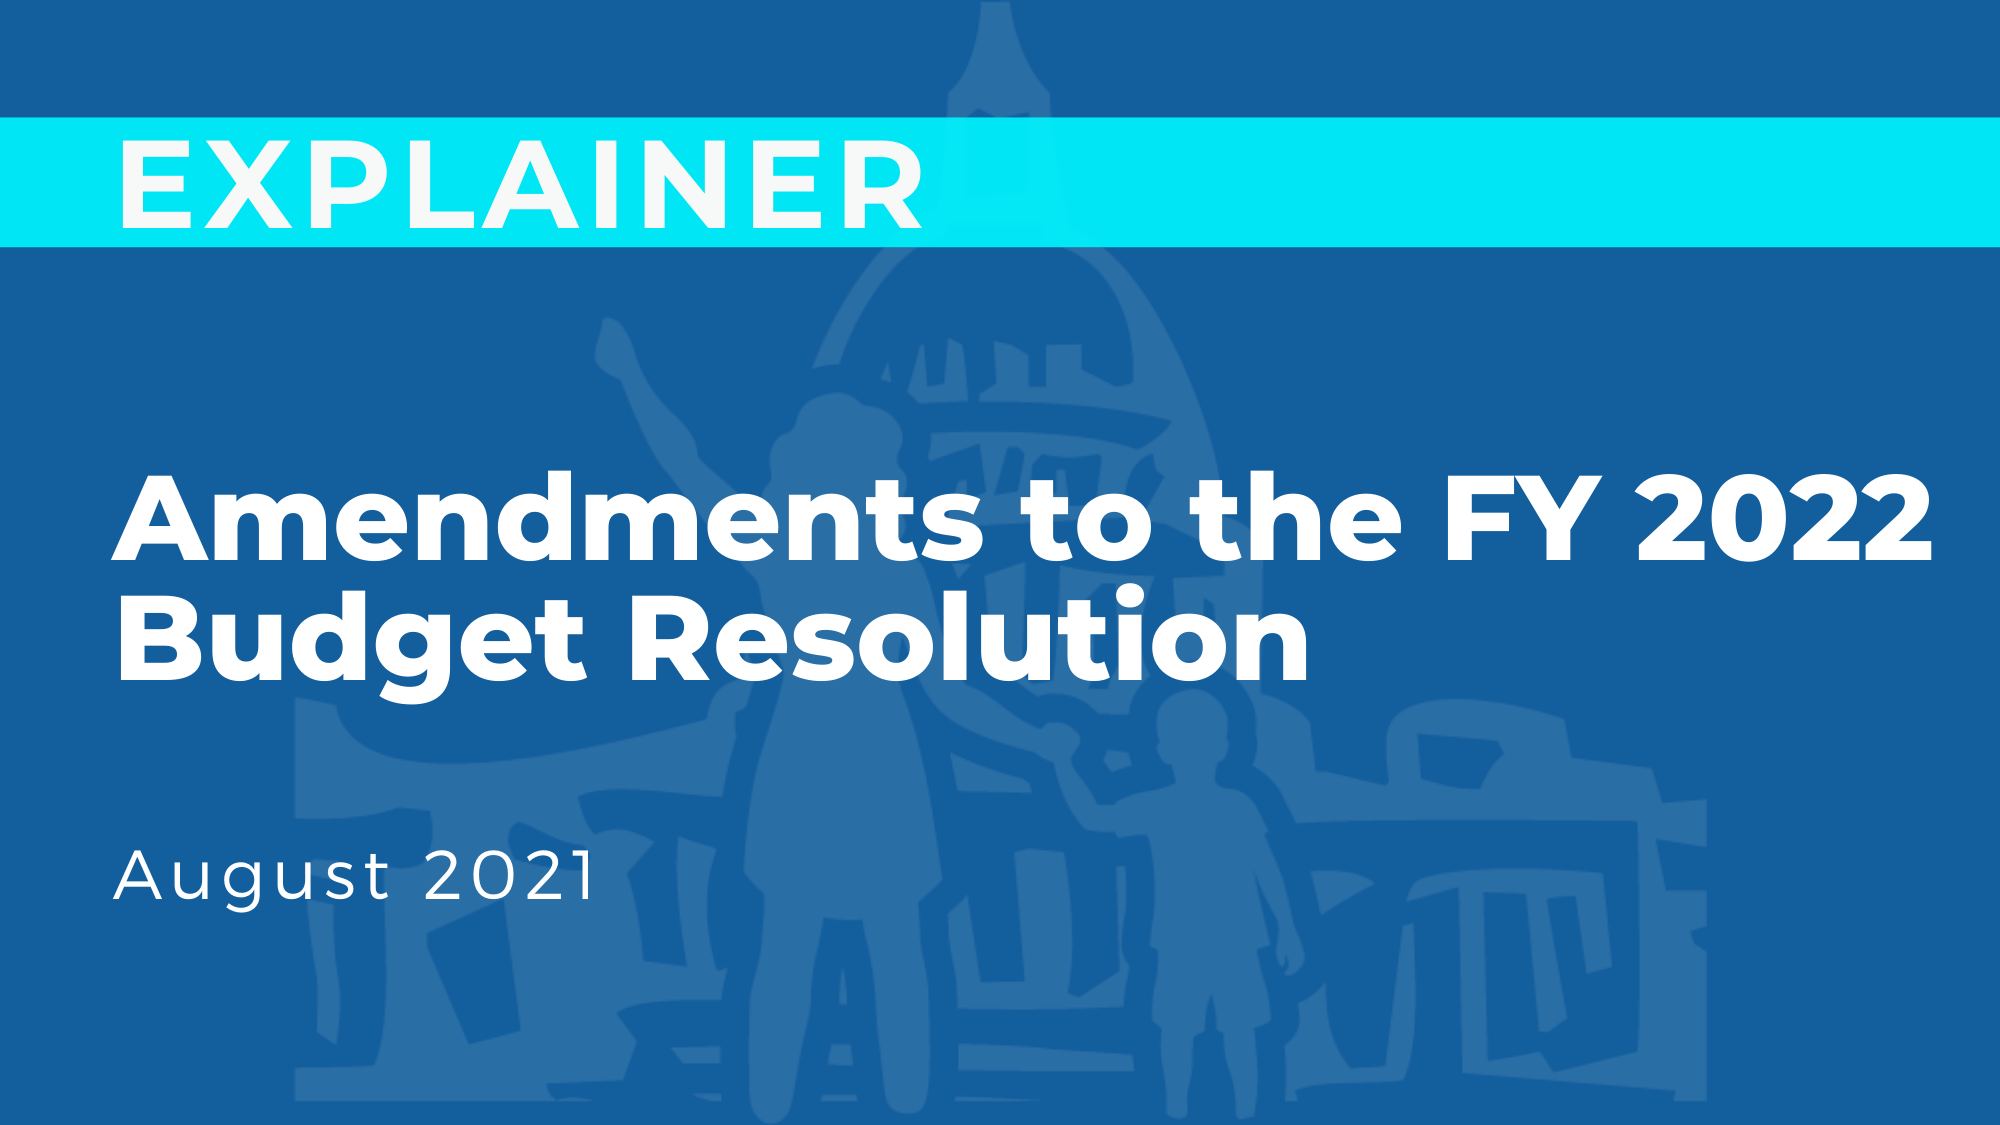 Amendments to the FY 2022 Budget Resolution